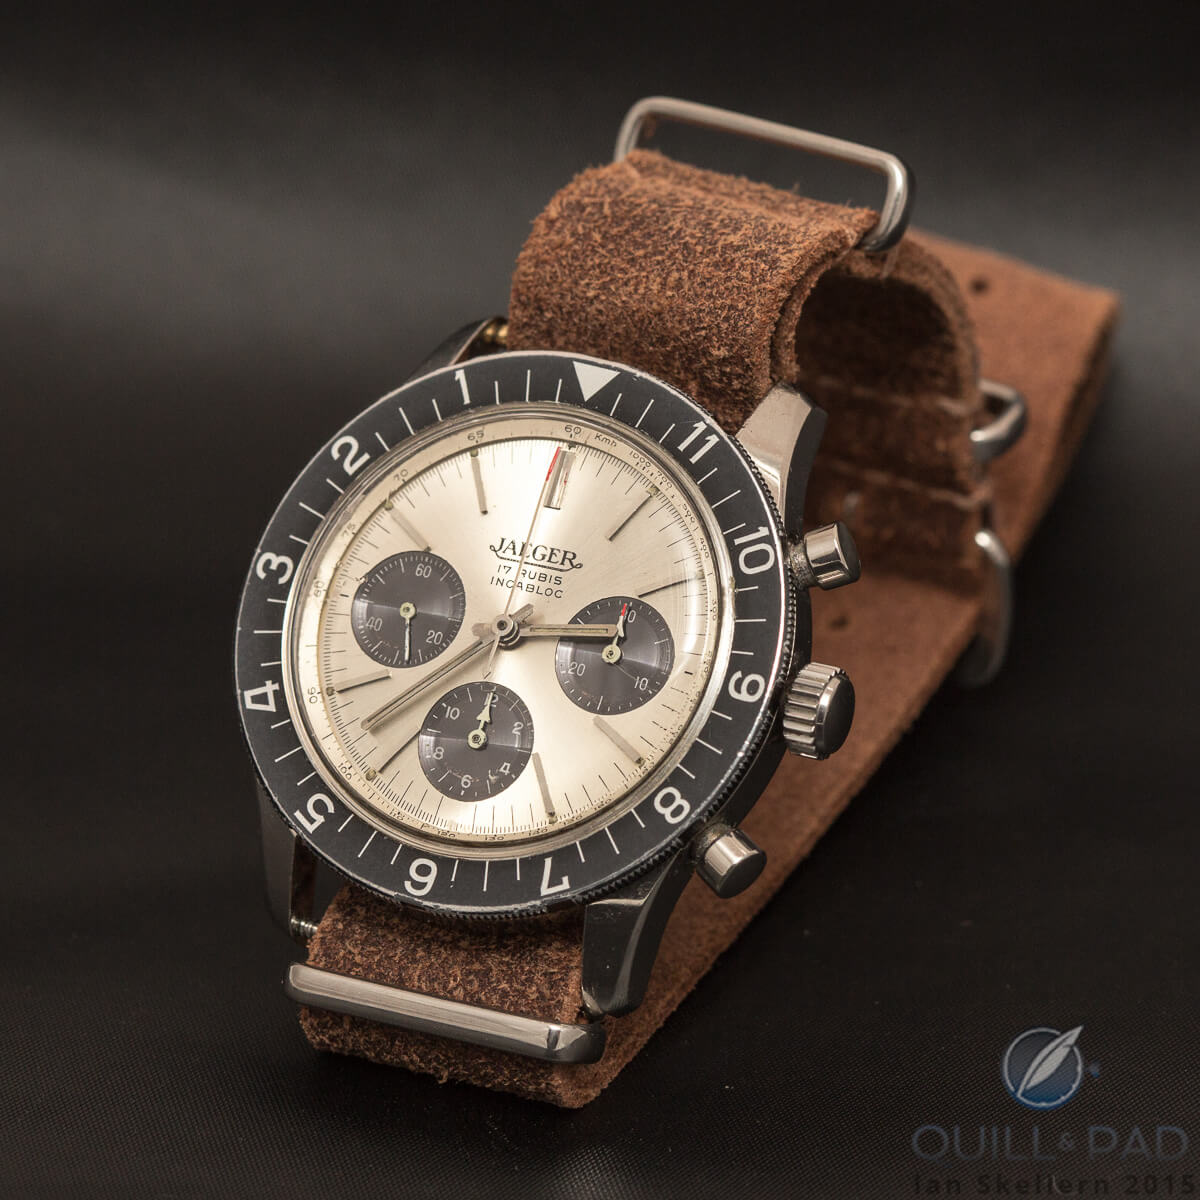 The distressed leather strap perfectly complements this vintage Jaeger 